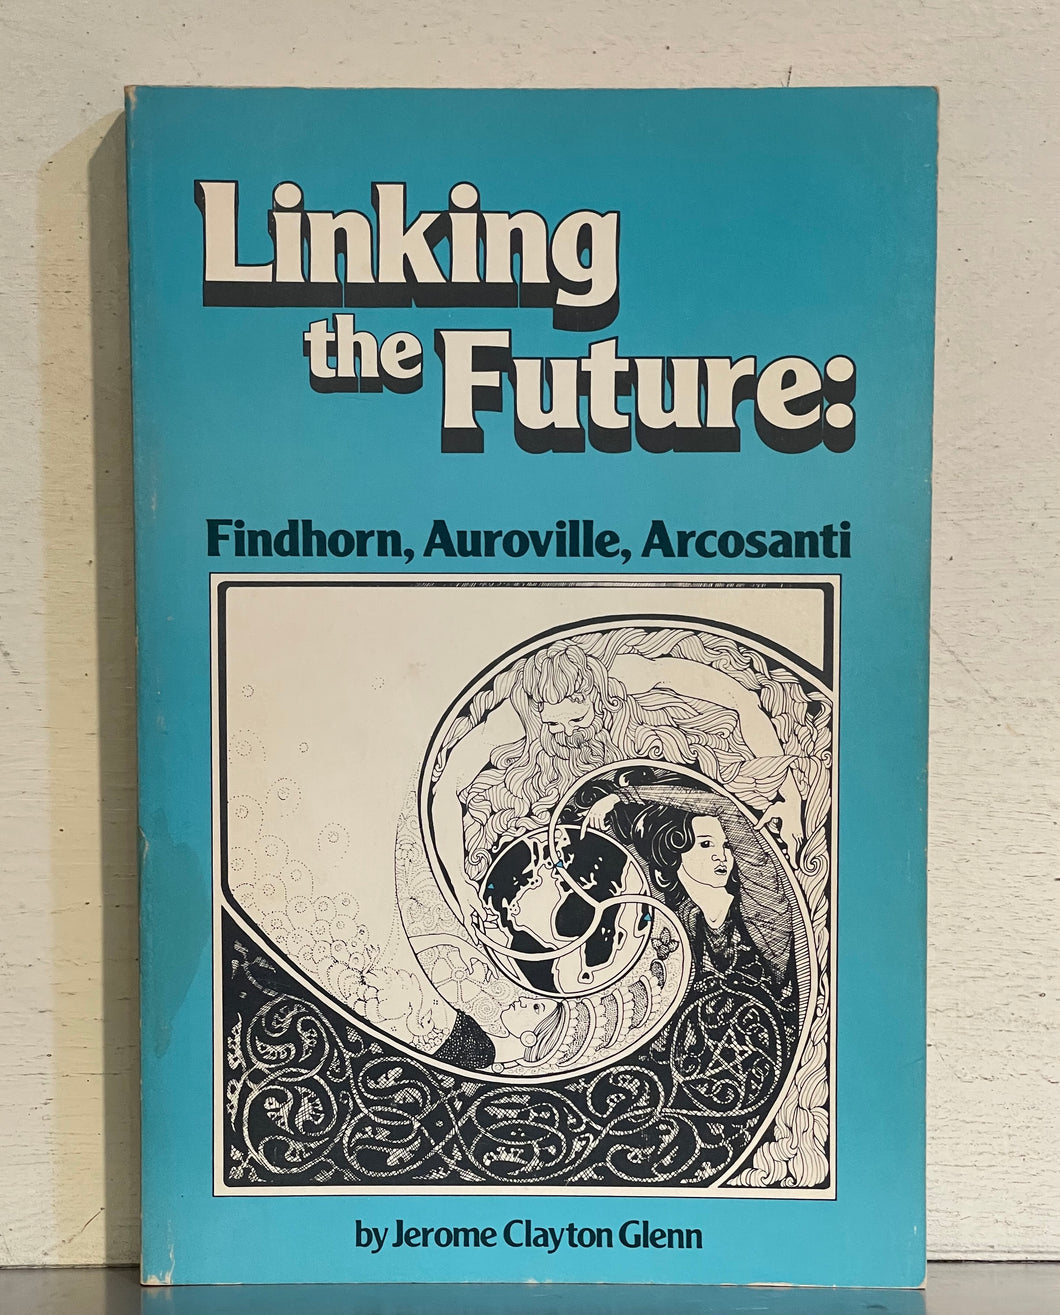 Linking the Future: Findhorn, Auroville, Arcosanti by Jerome Clayton Glenn